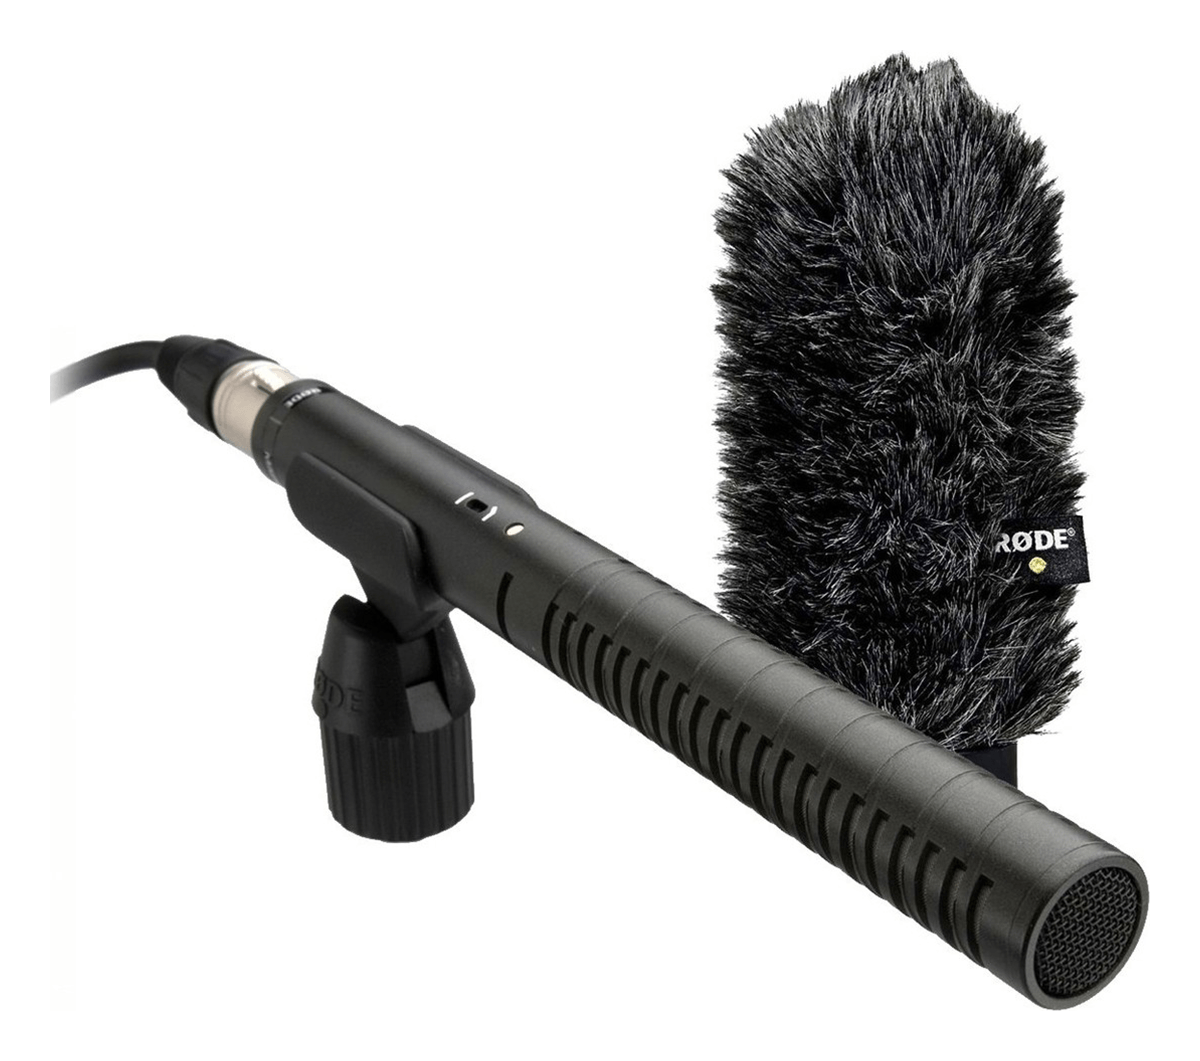 Rifle Mic to rent.